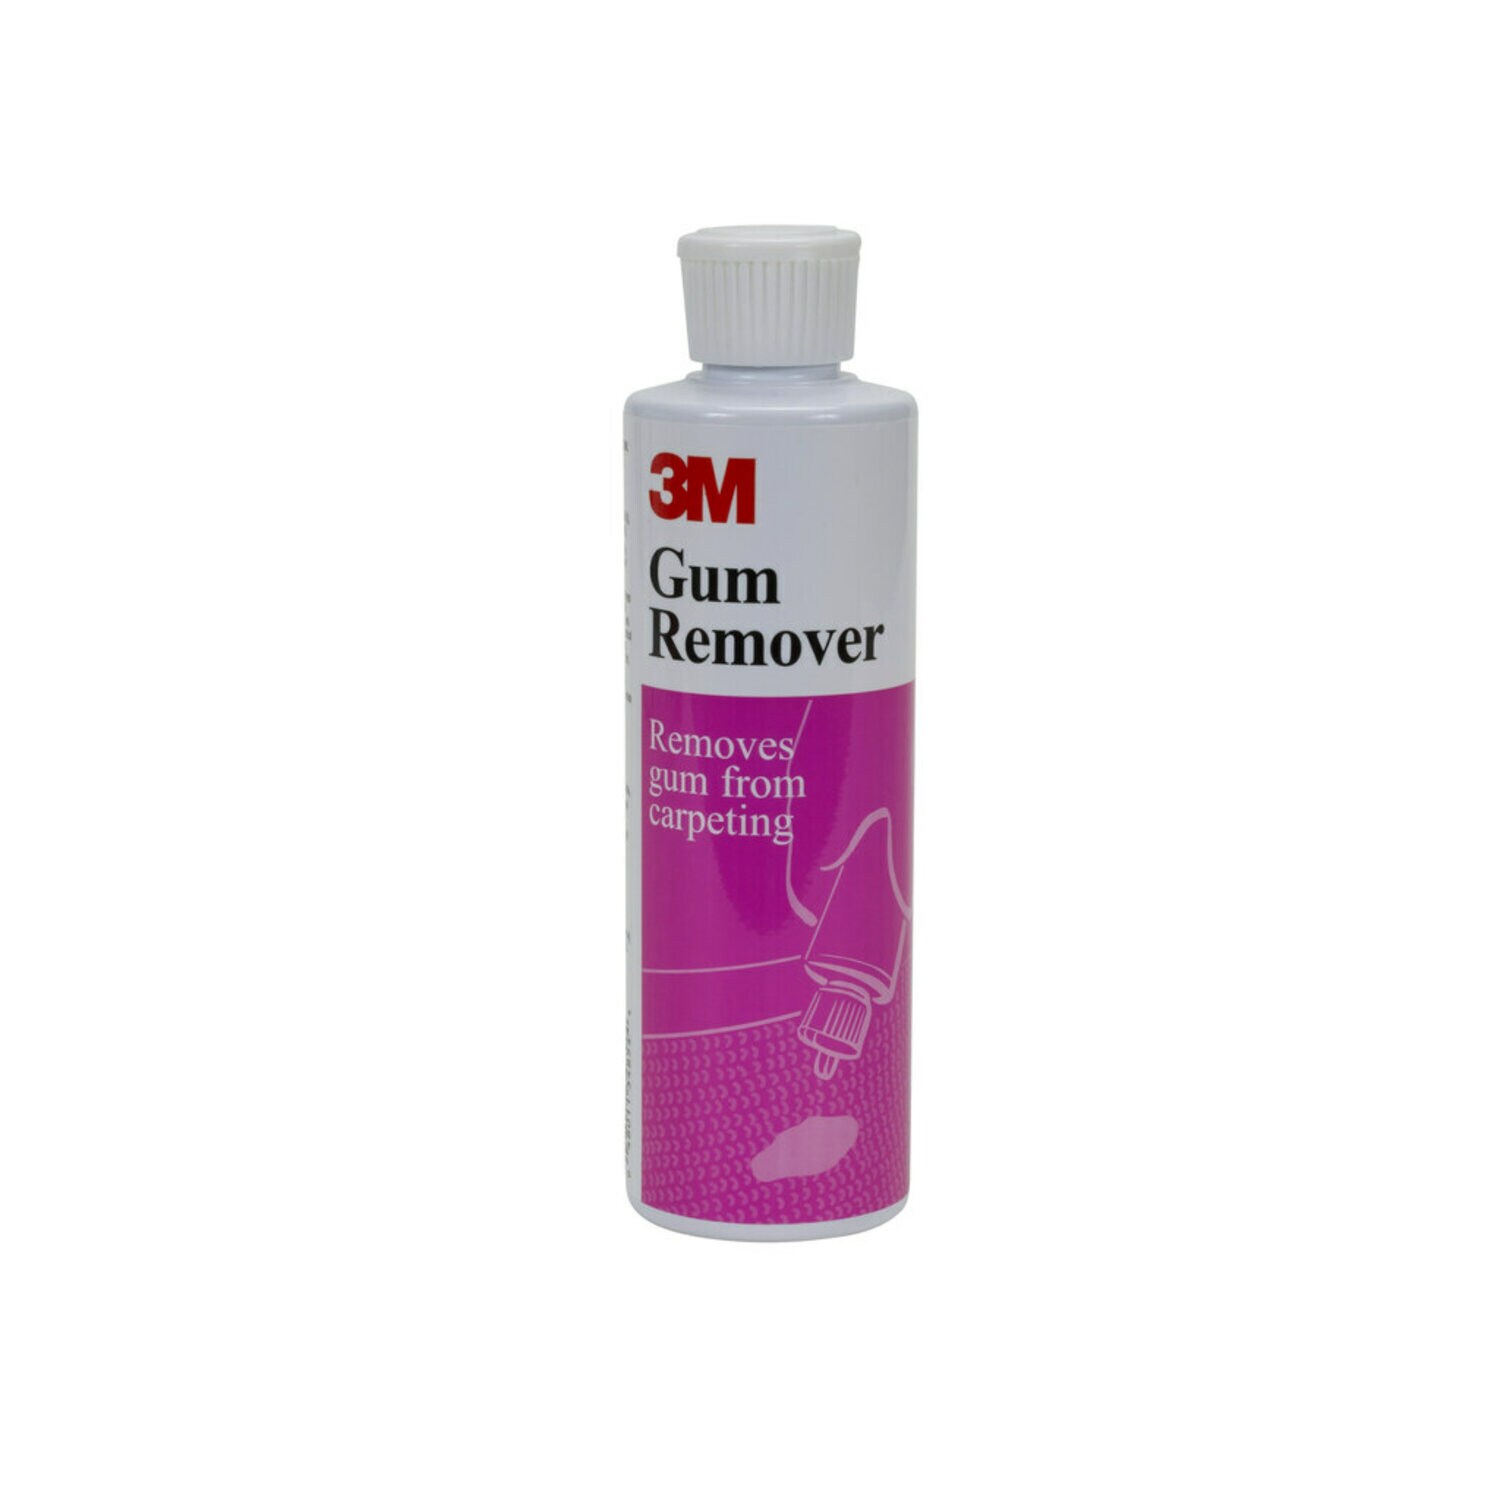 7000024645 - 3M Gum Remover Ready-to-Use, 8 Oz, 6/Case